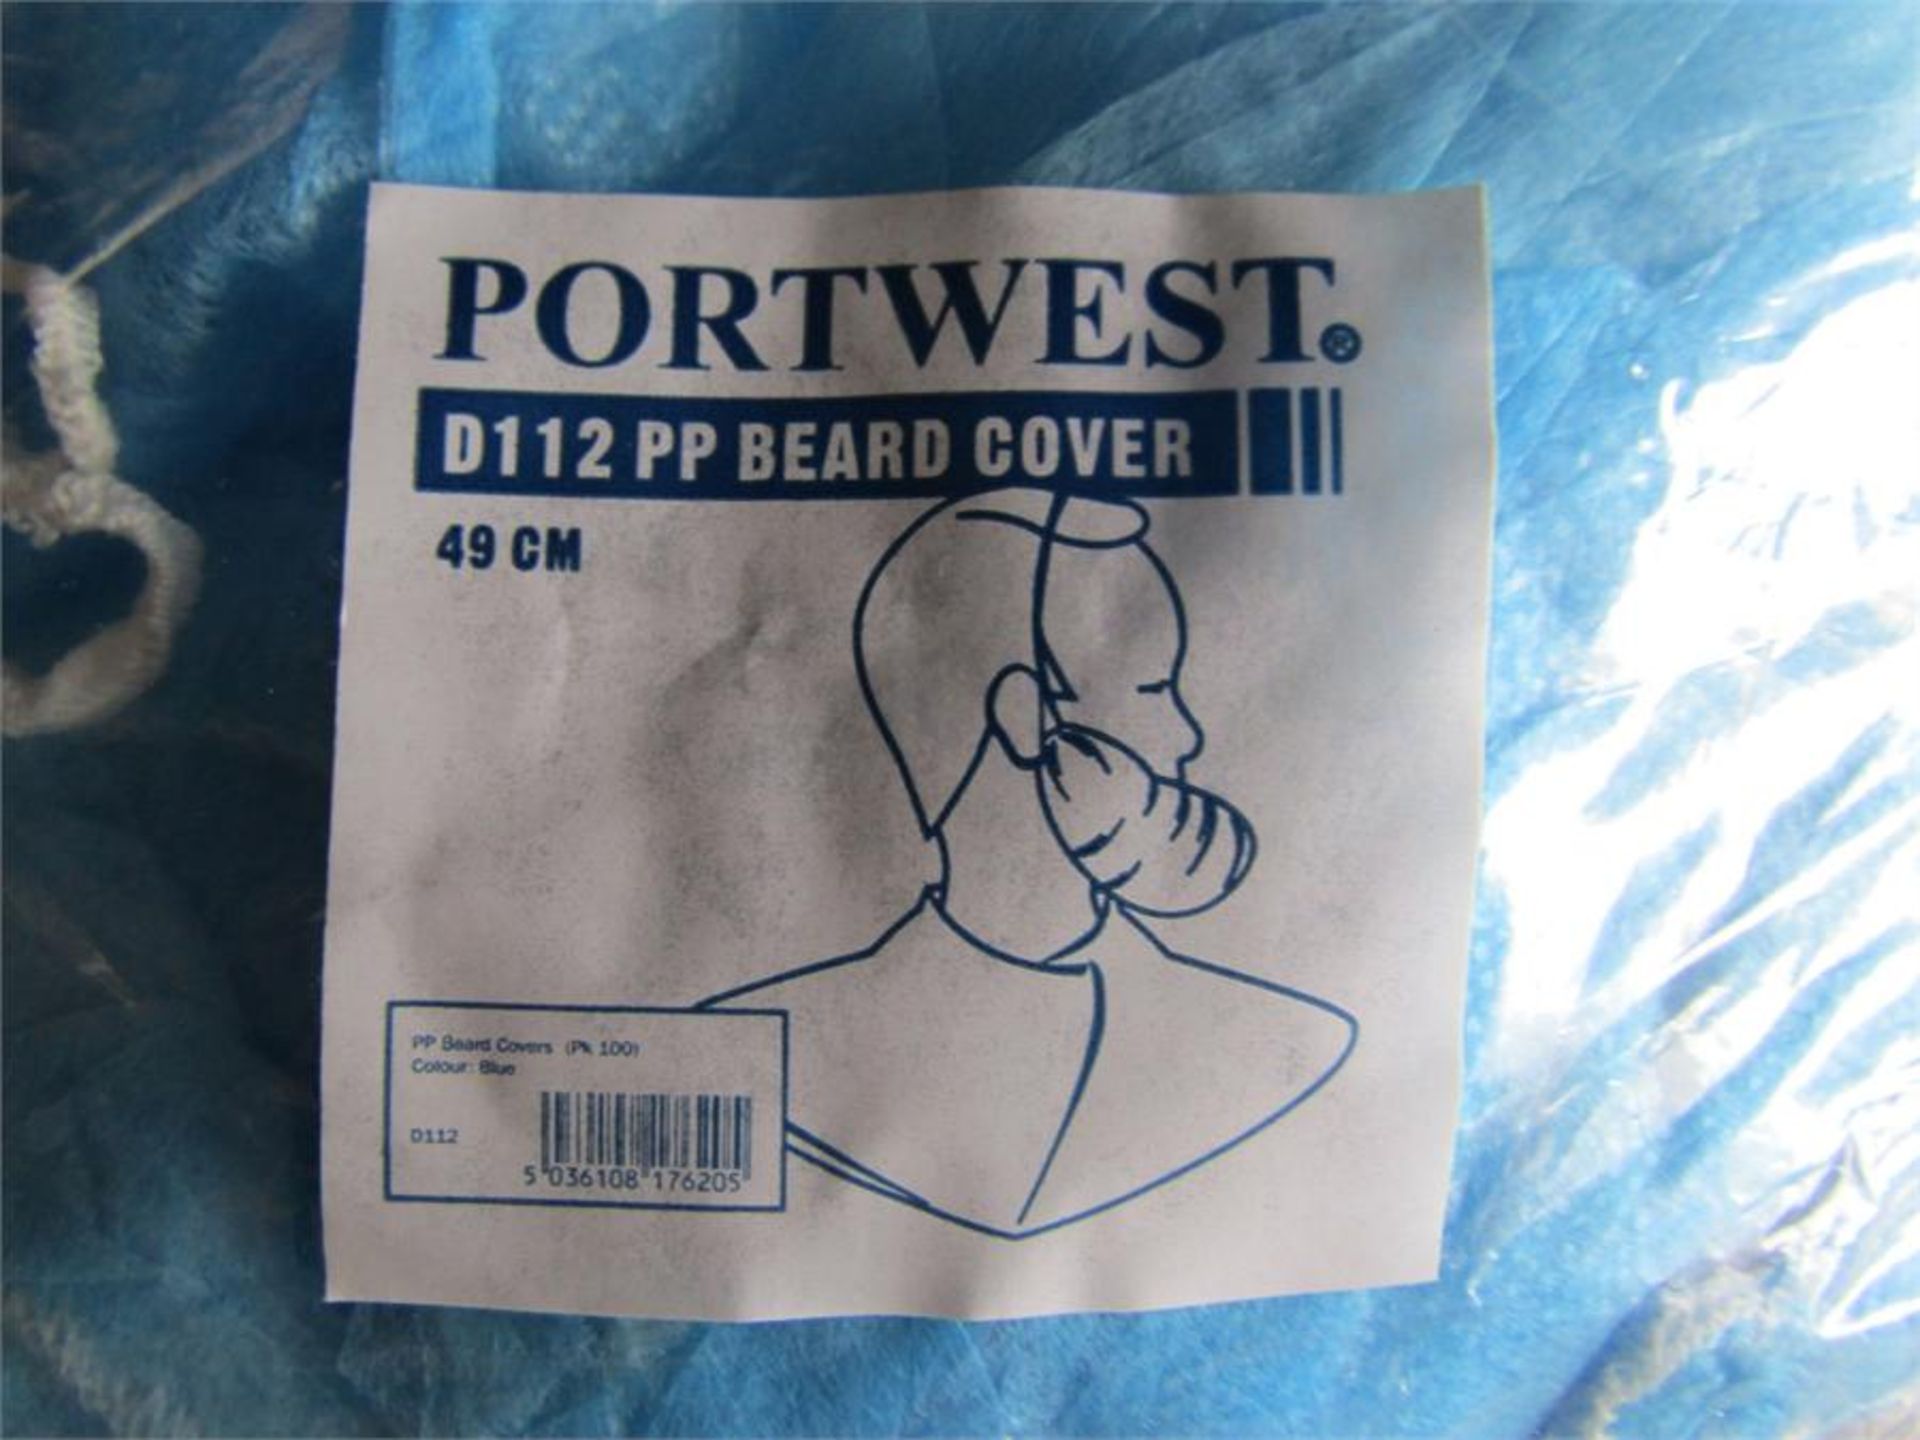 Pack of 1000 x Disposable Portwest Beard Covers - Image 2 of 2